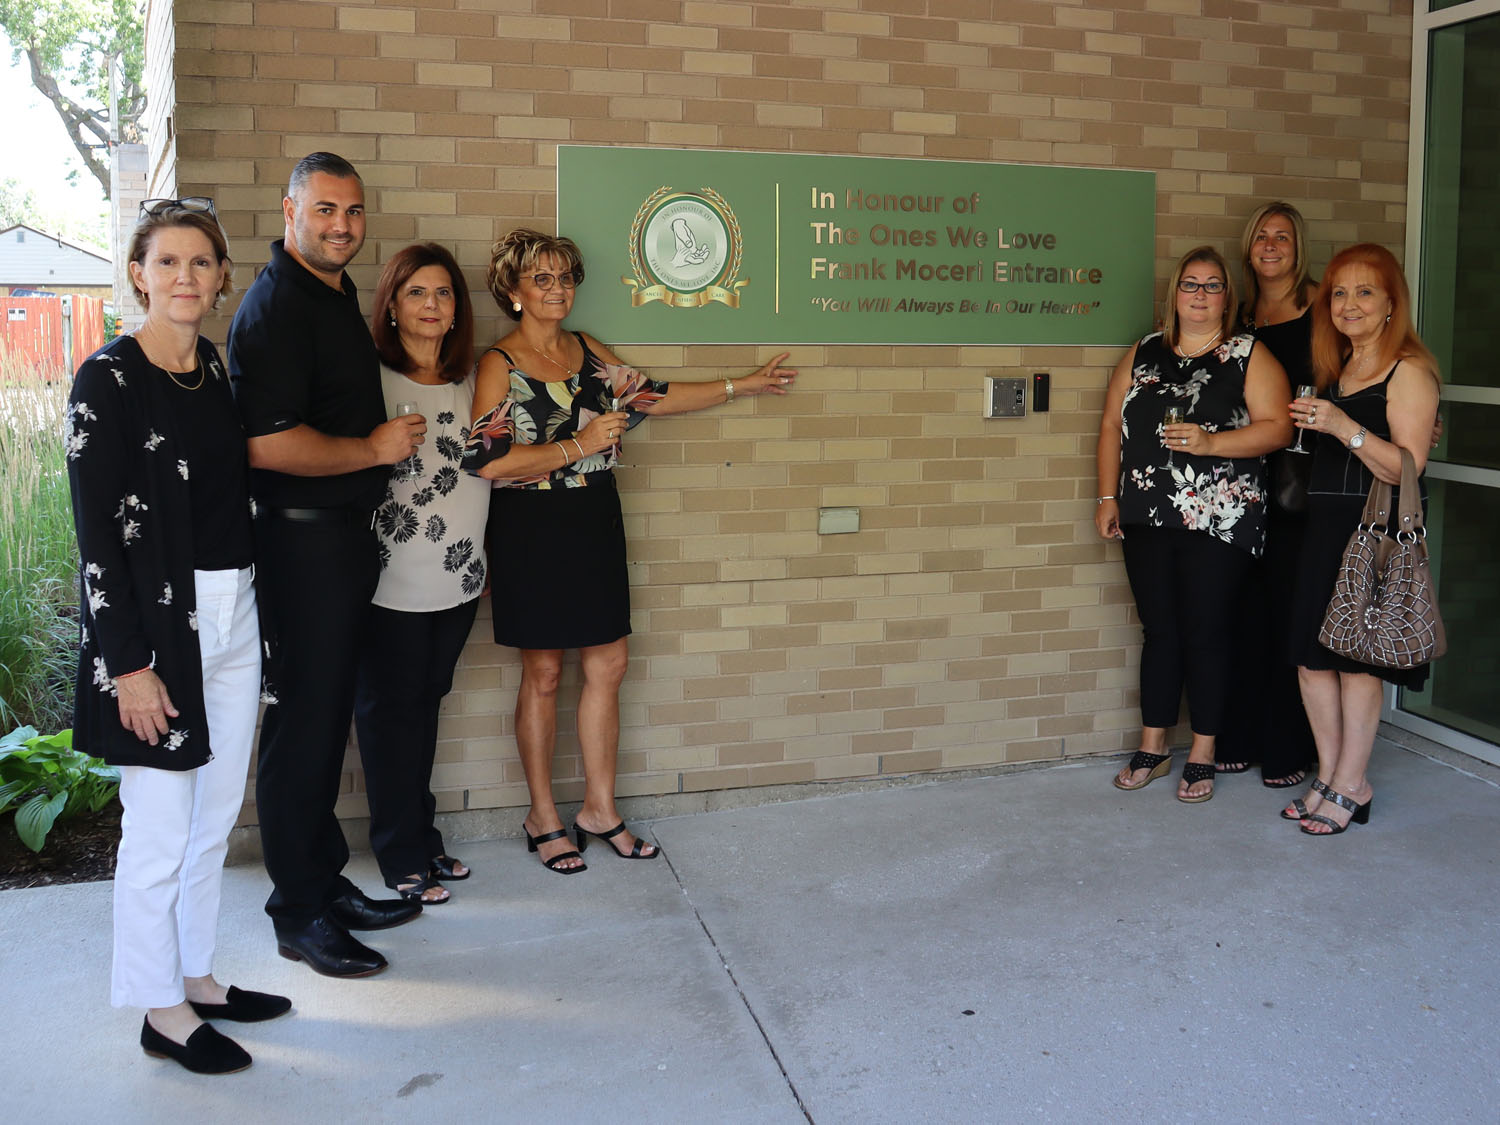 A group gathered around the Frank Moceri entrance plaque.